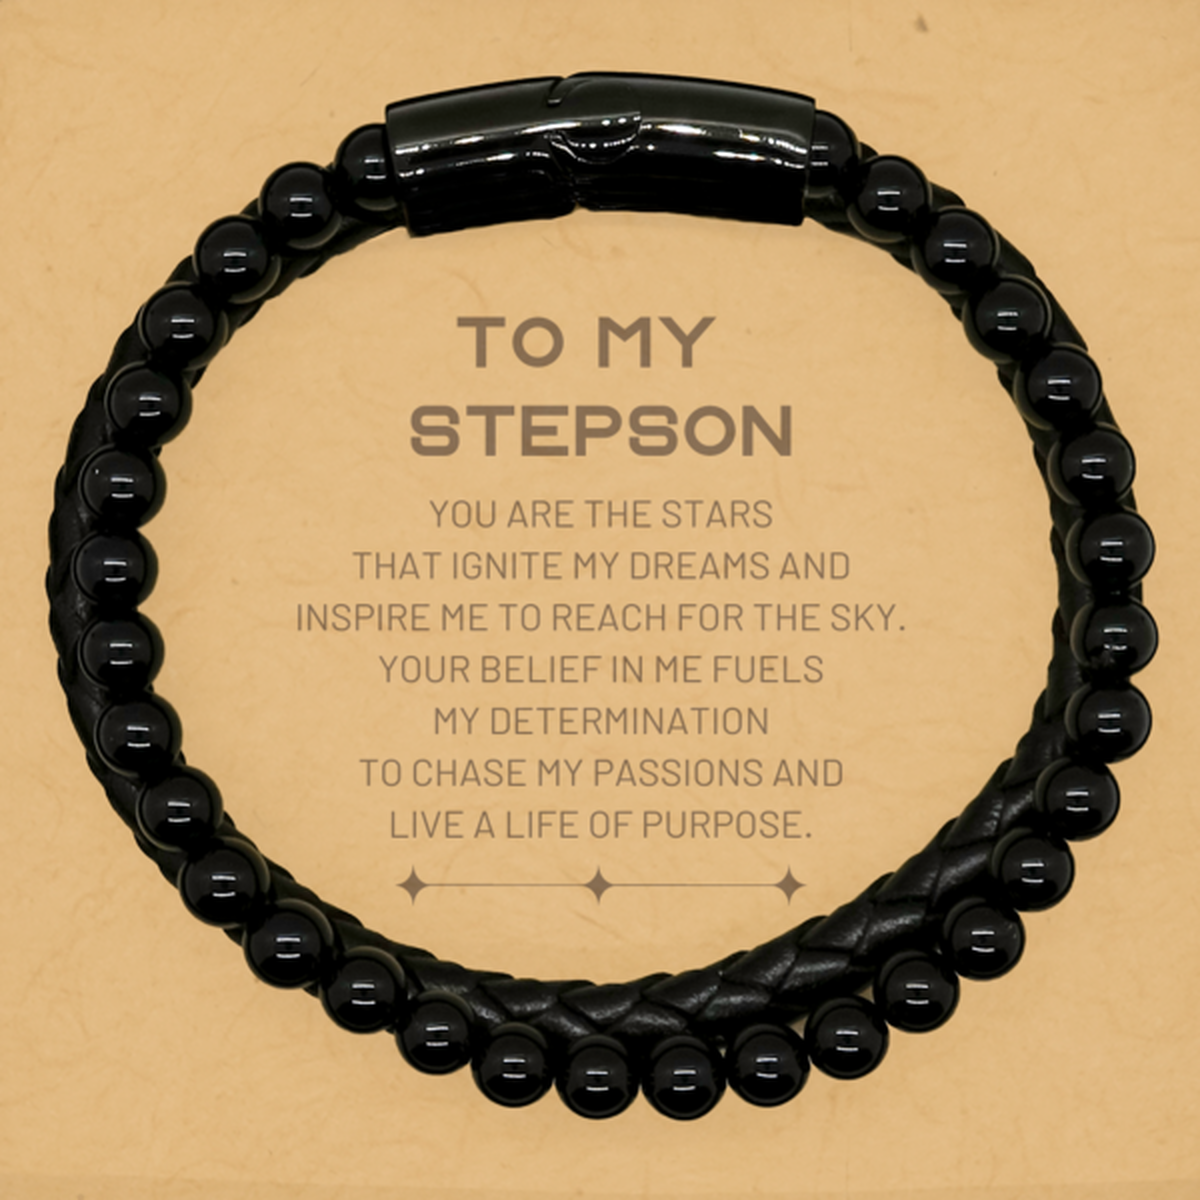 To My Stepson Stone Leather Bracelets, You are the stars that ignite my dreams and inspire me to reach for the sky, Birthday Unique Gifts For Stepson, Thank You Gifts For Stepson